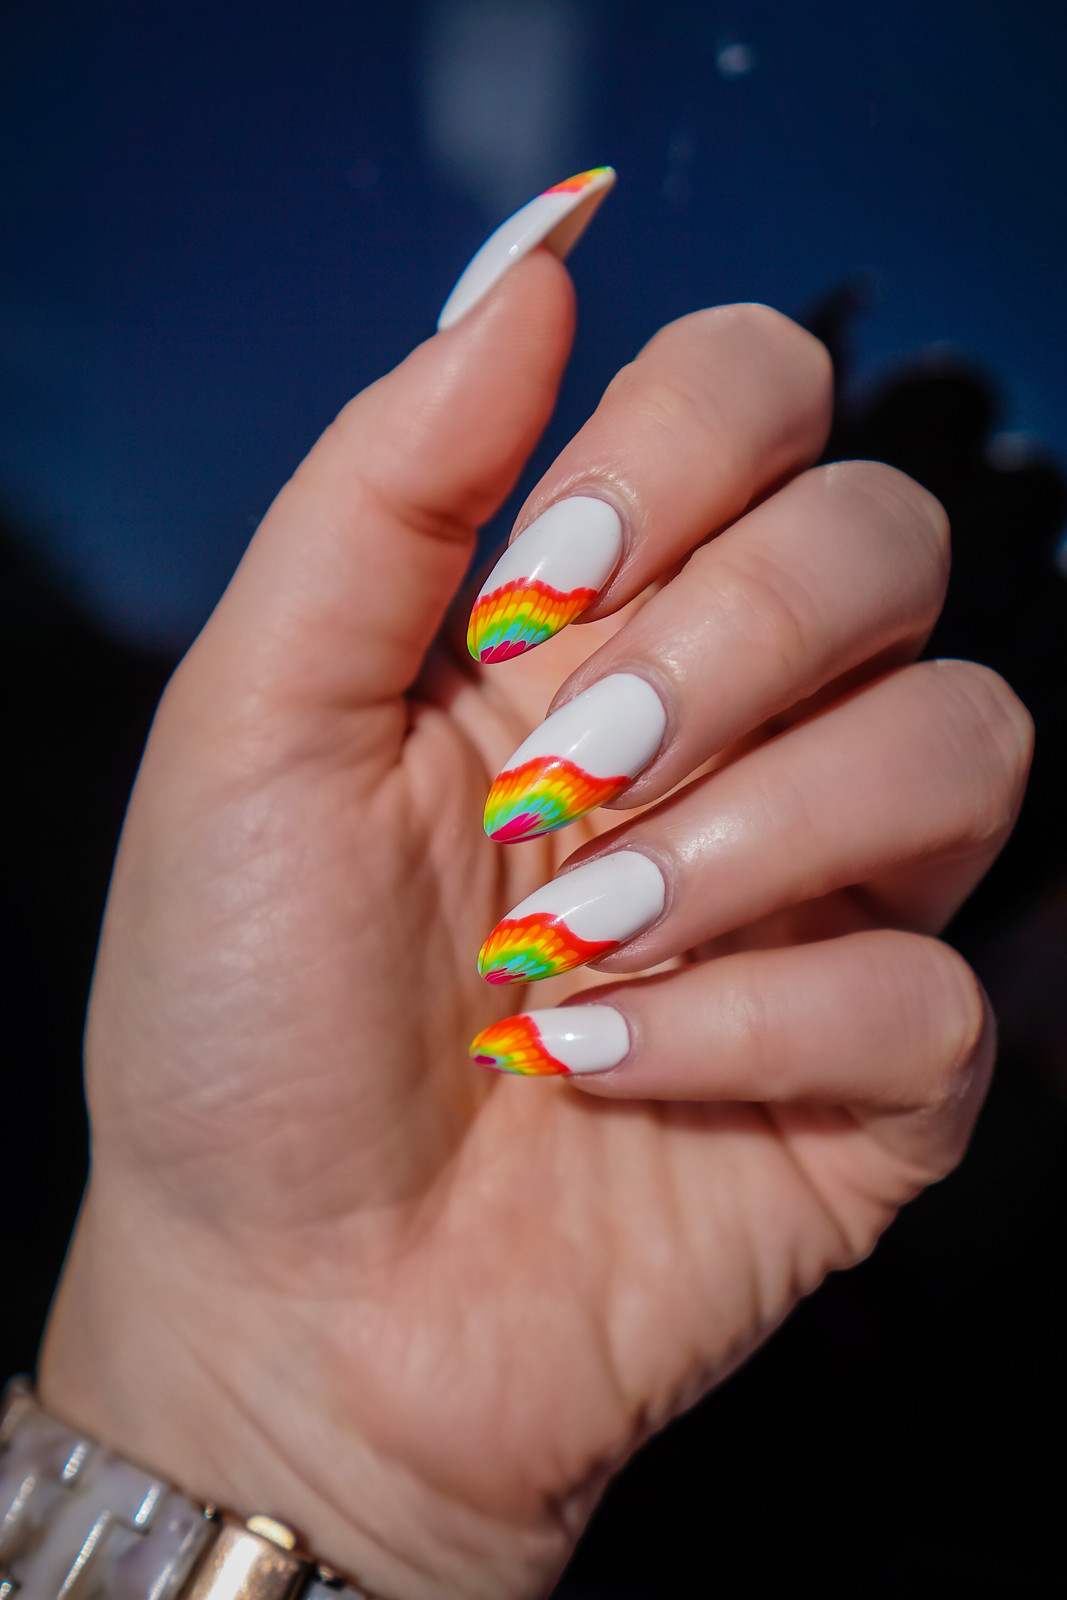 Bright summer nails | Gallery posted by style_andmusic | Lemon8